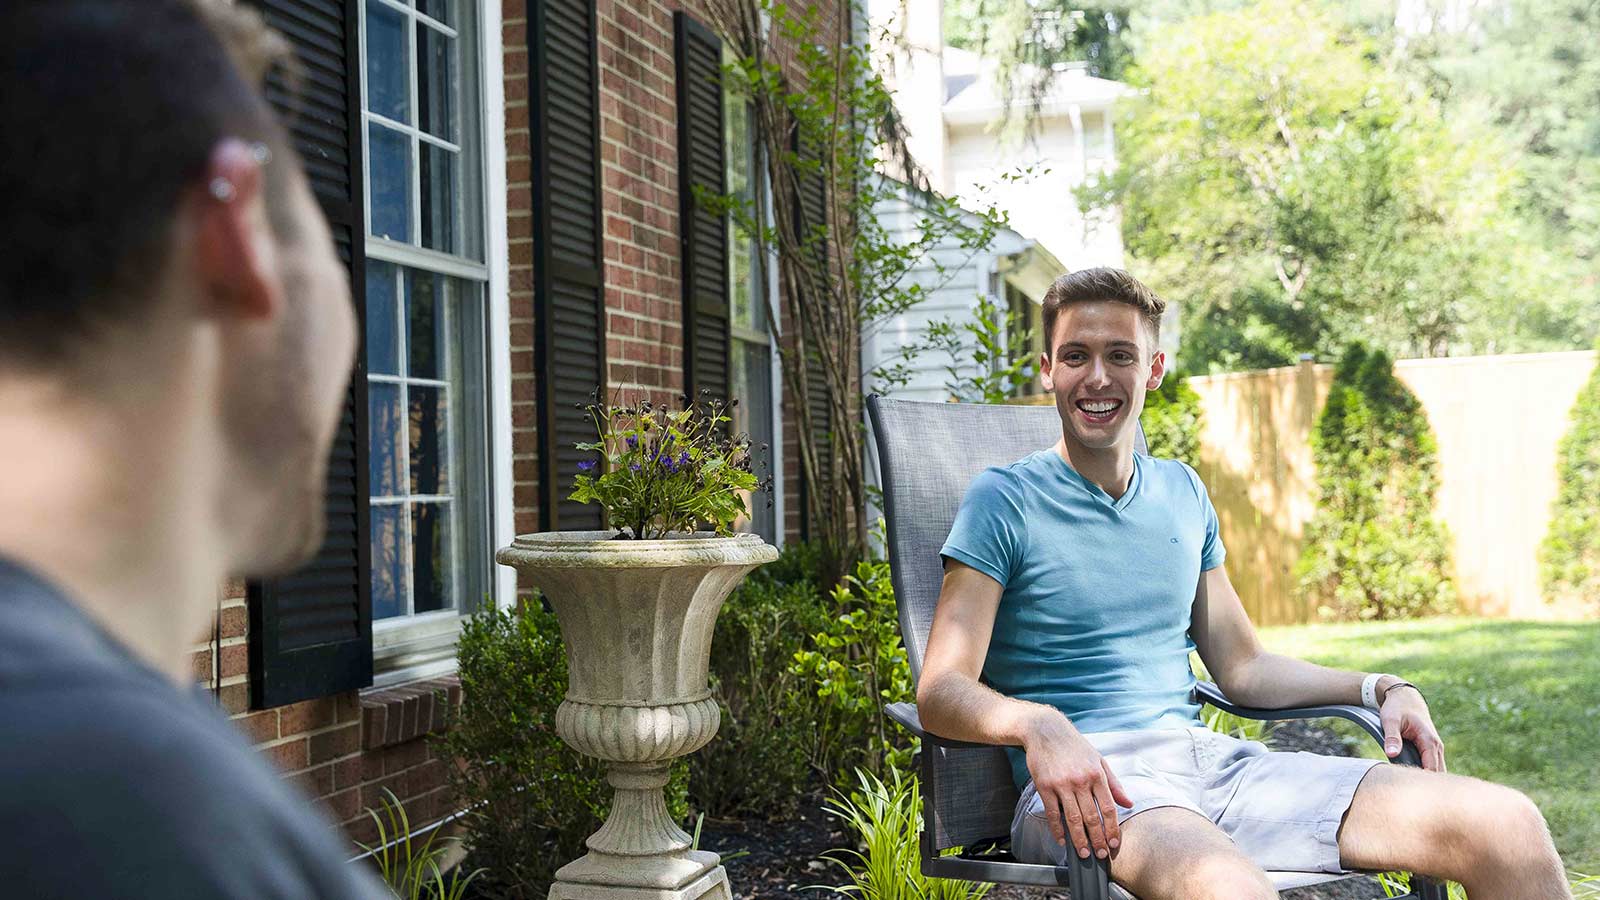 Two individuals relaxing outside a brick home, one smiling and seated comfortably on a patio chair.